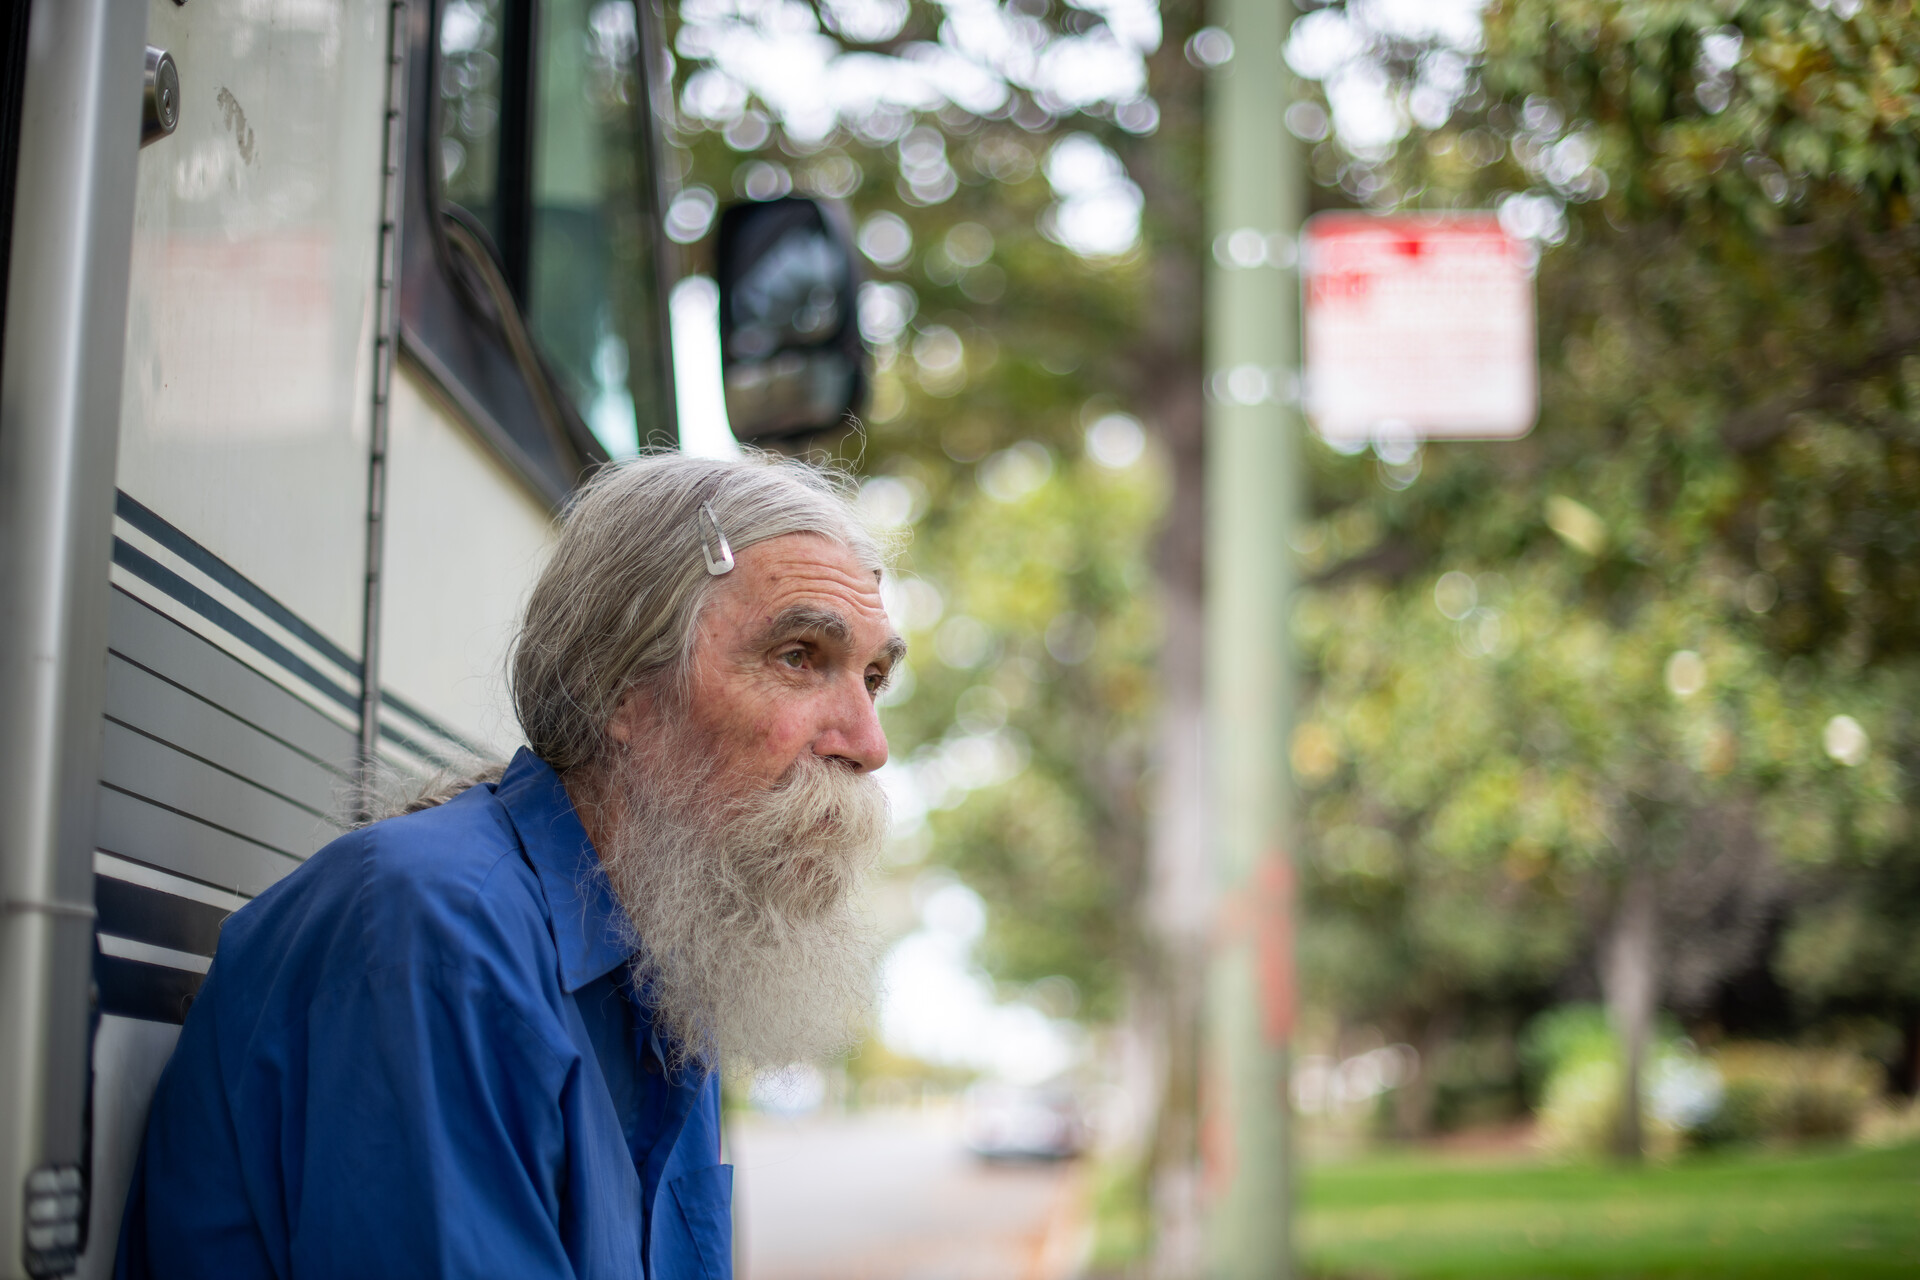 Close up photo of elderly man wearing blue shirt with large gray beard with exterior wall of RV behind him